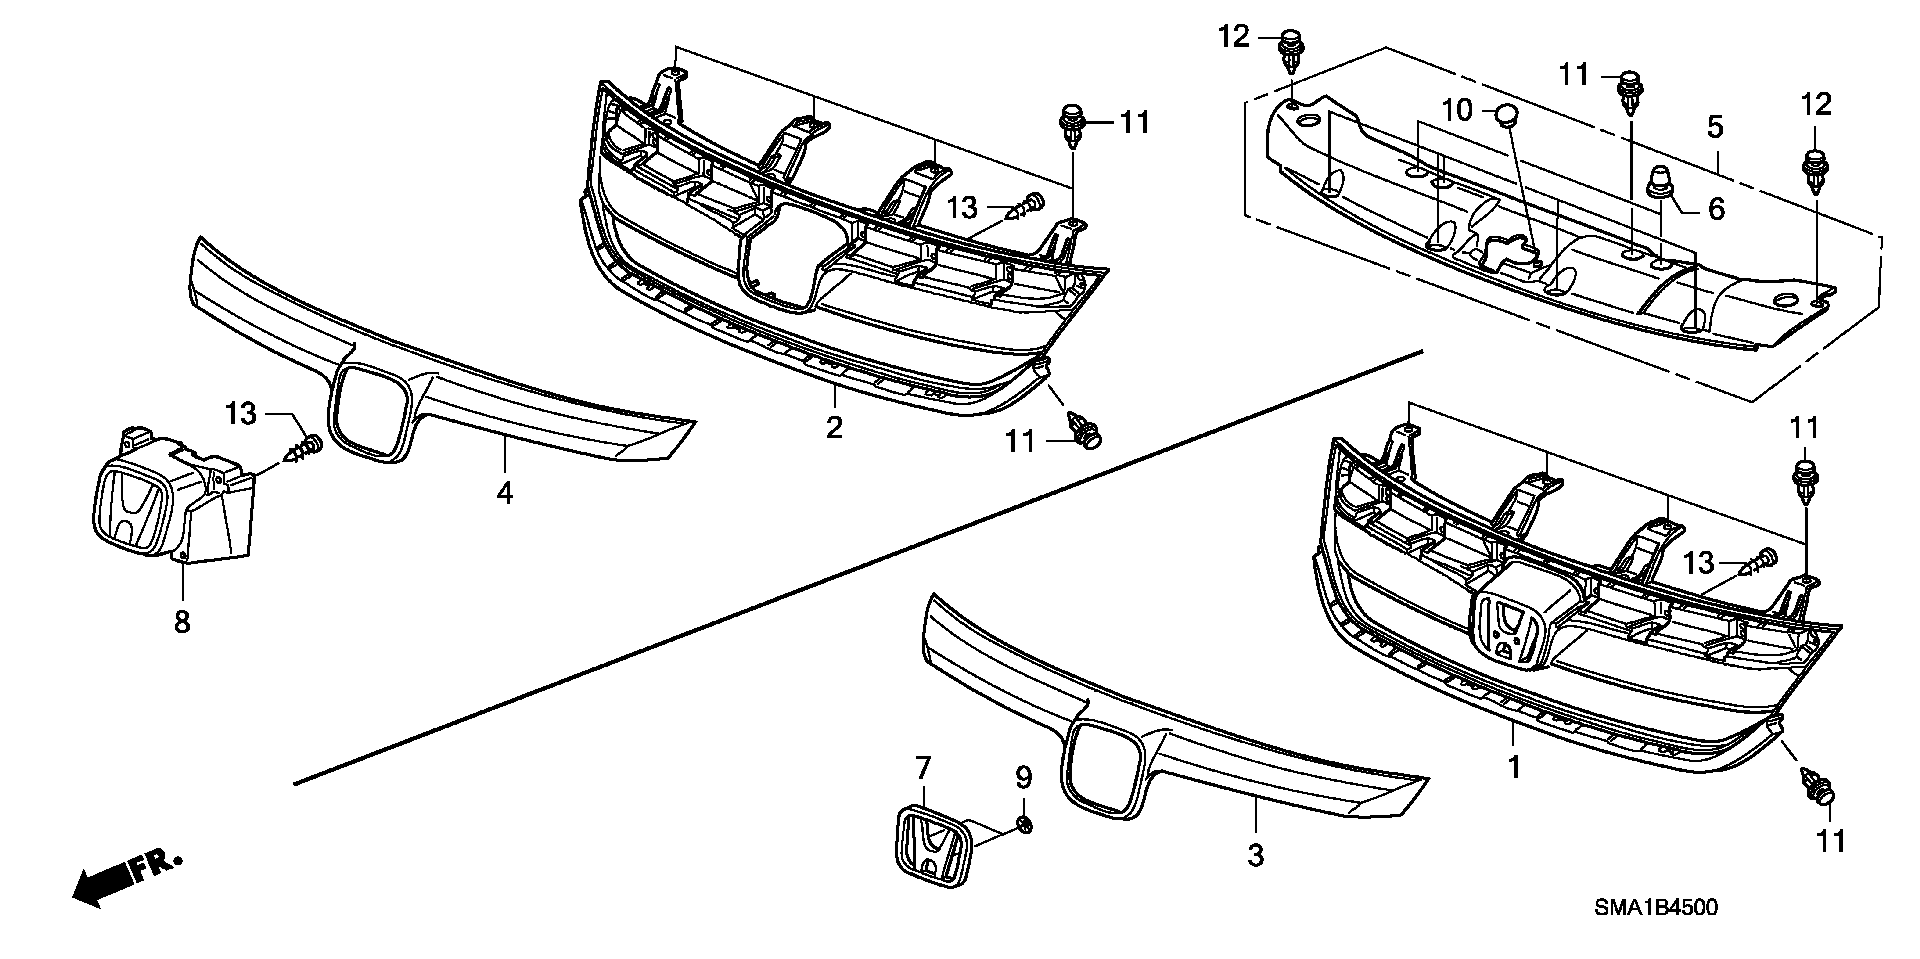 FRONT GRILLE(1)